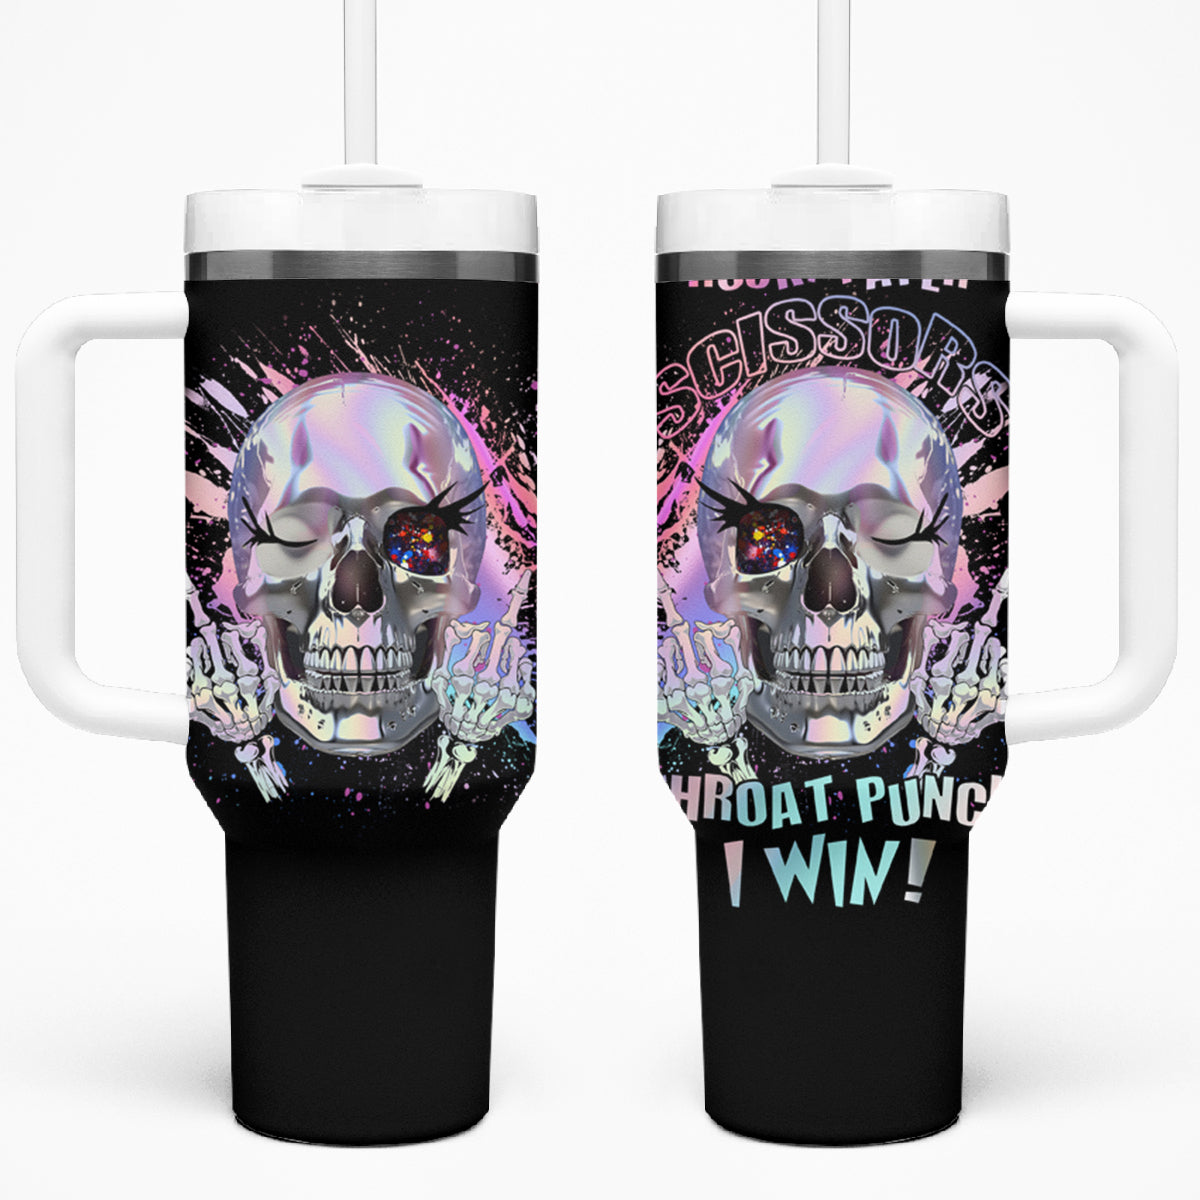 Rock Paper Throat Punch I Win Tumbler With Handle